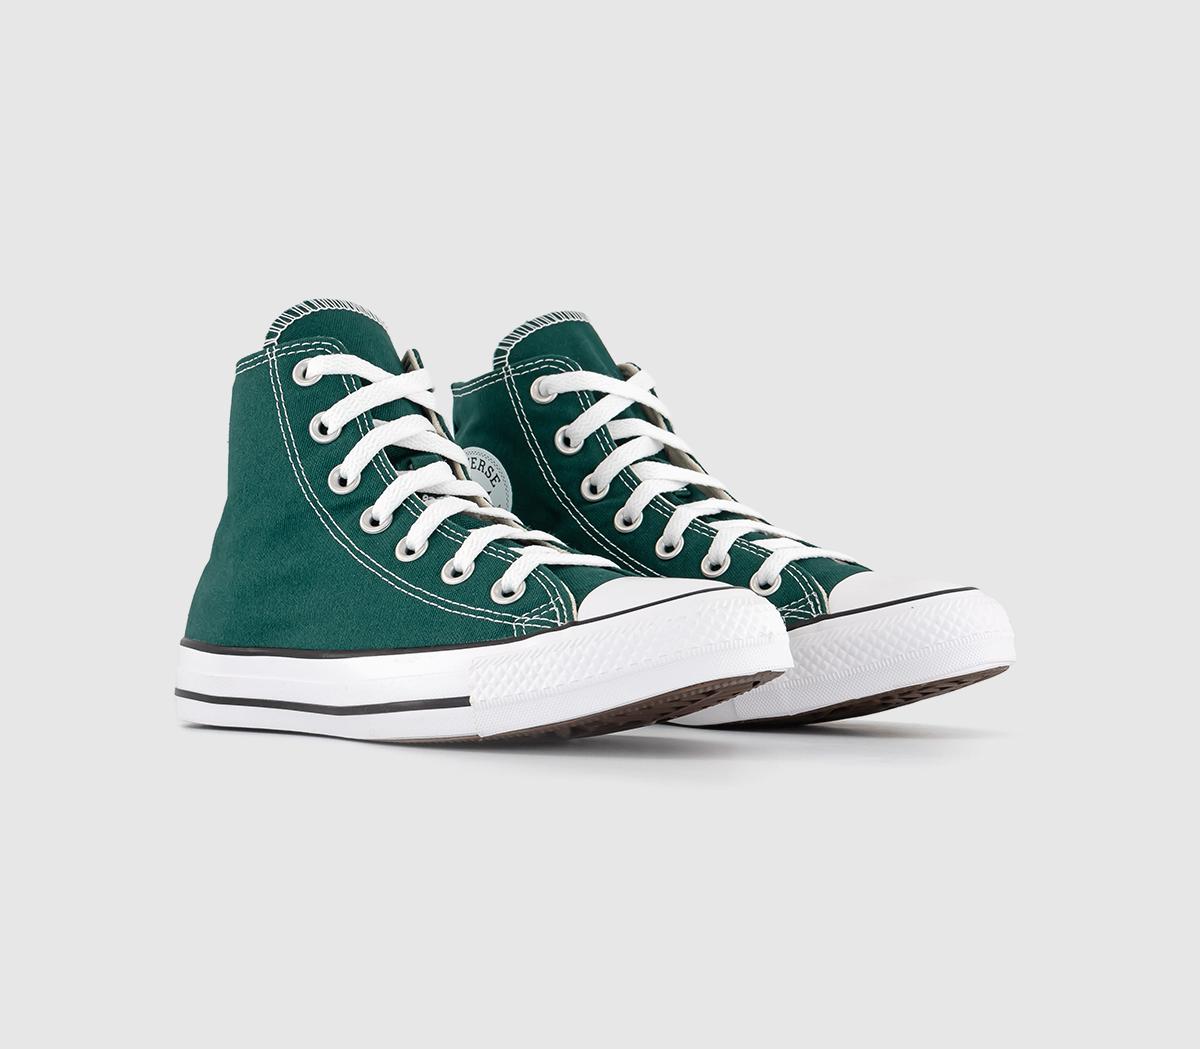 Converse All Star Hi Trainers Dragon Scale Green, 10